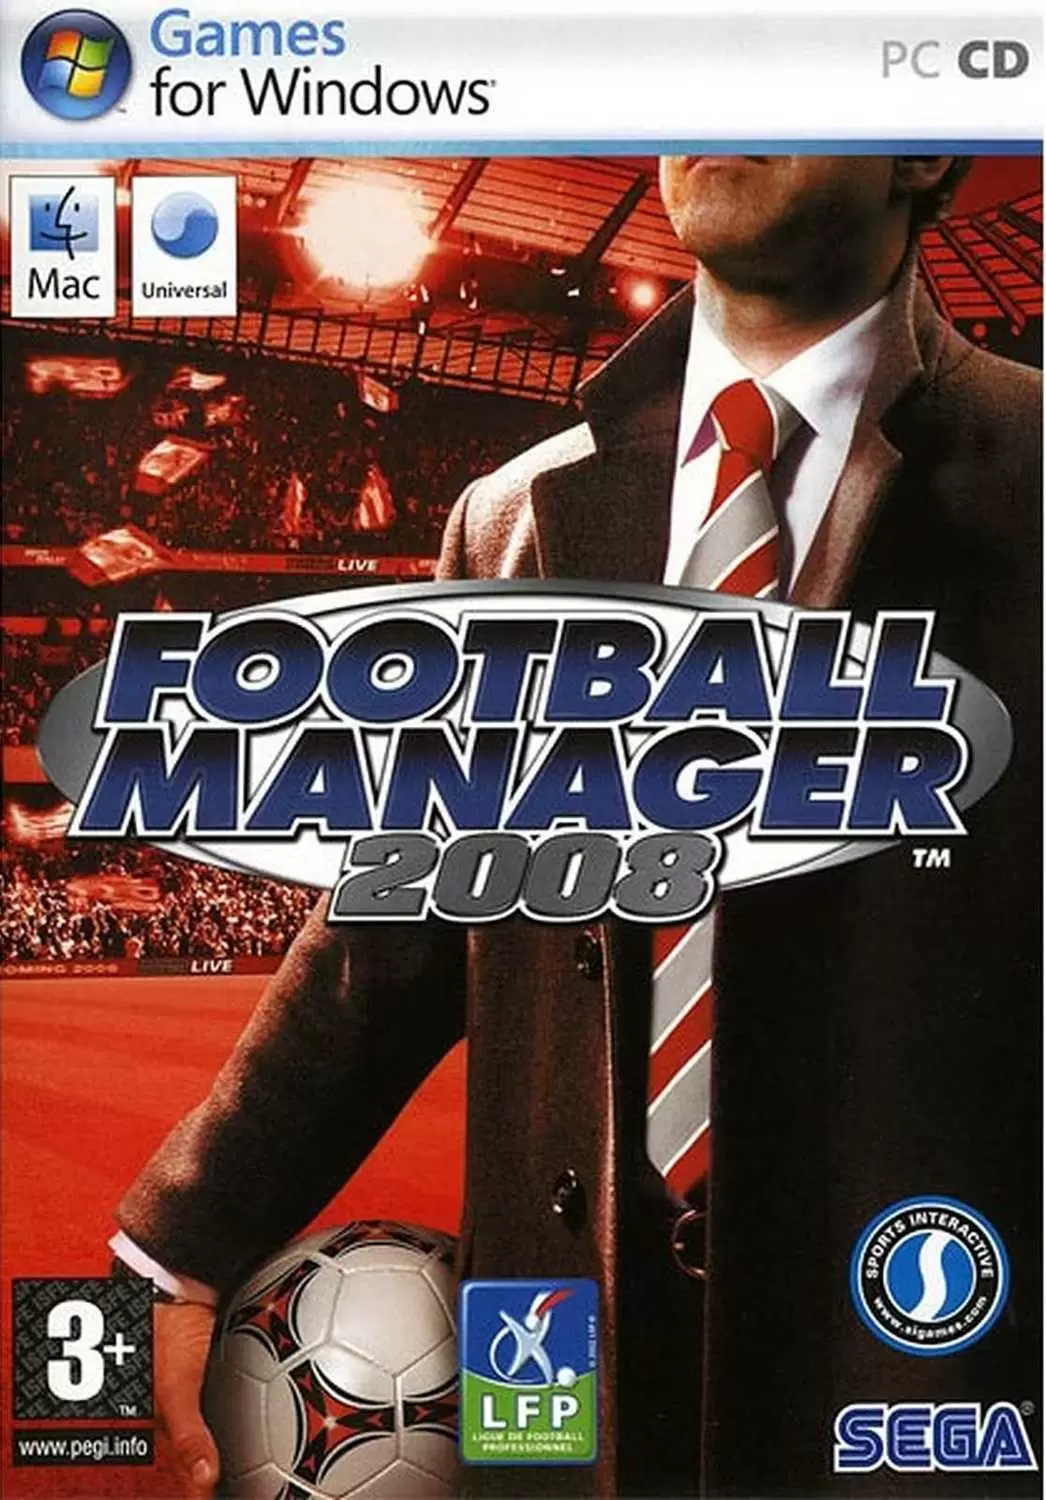 Jeux PC - Football Manager 2008